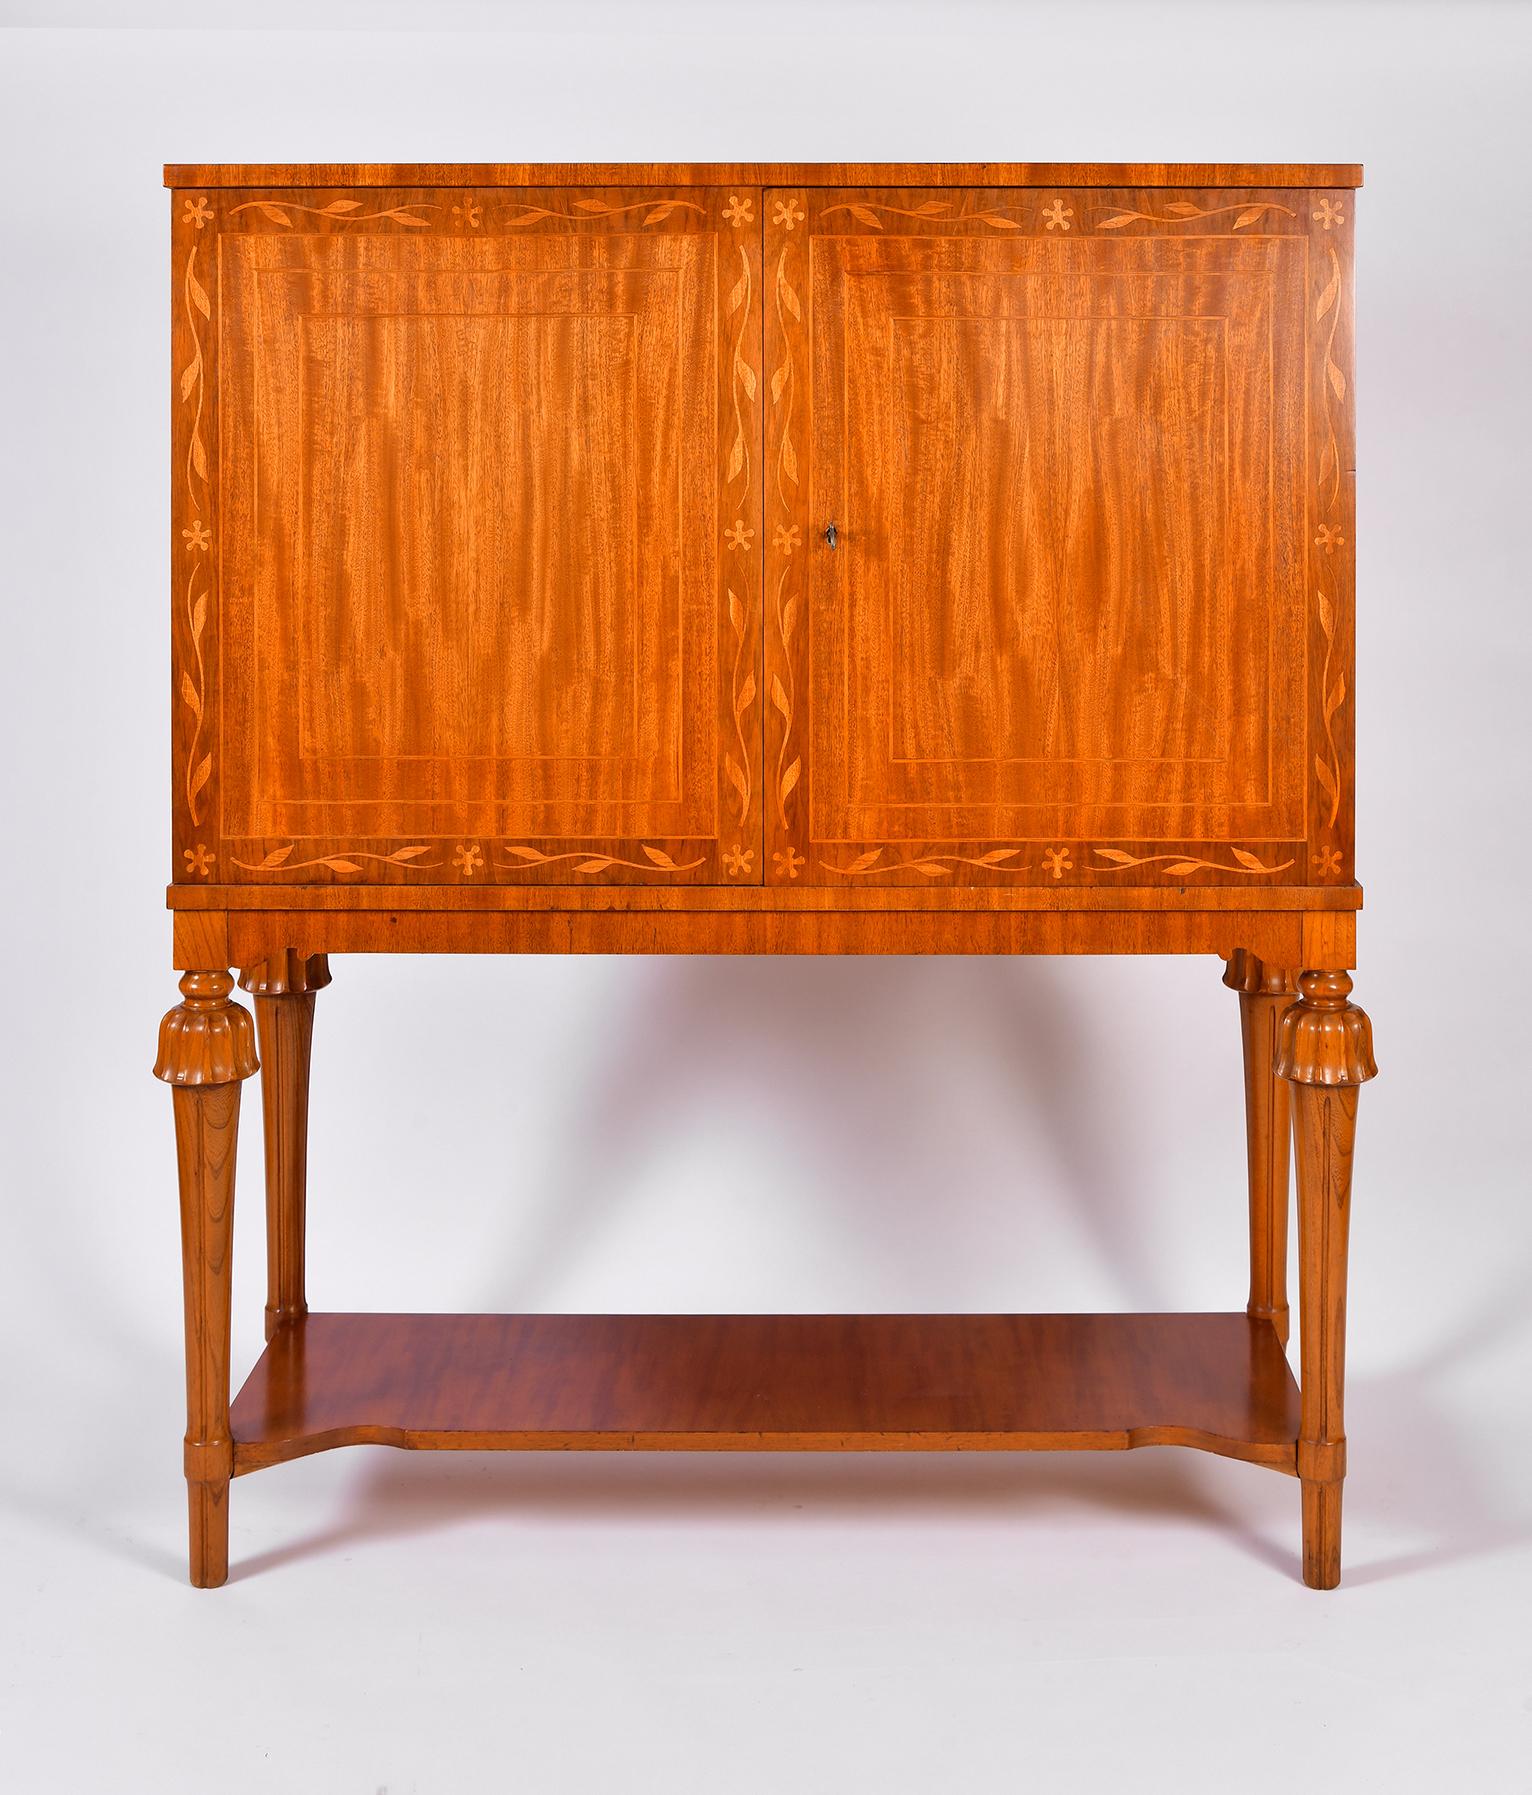 A pair of mahogany cabinets on stand, with floral marquetry, the cabinets with two doors revealing a fitted bookmatched ash veneer interior with drawers and shelves, resting on four carved legs, with shaped rails and lower shelf.
With its original